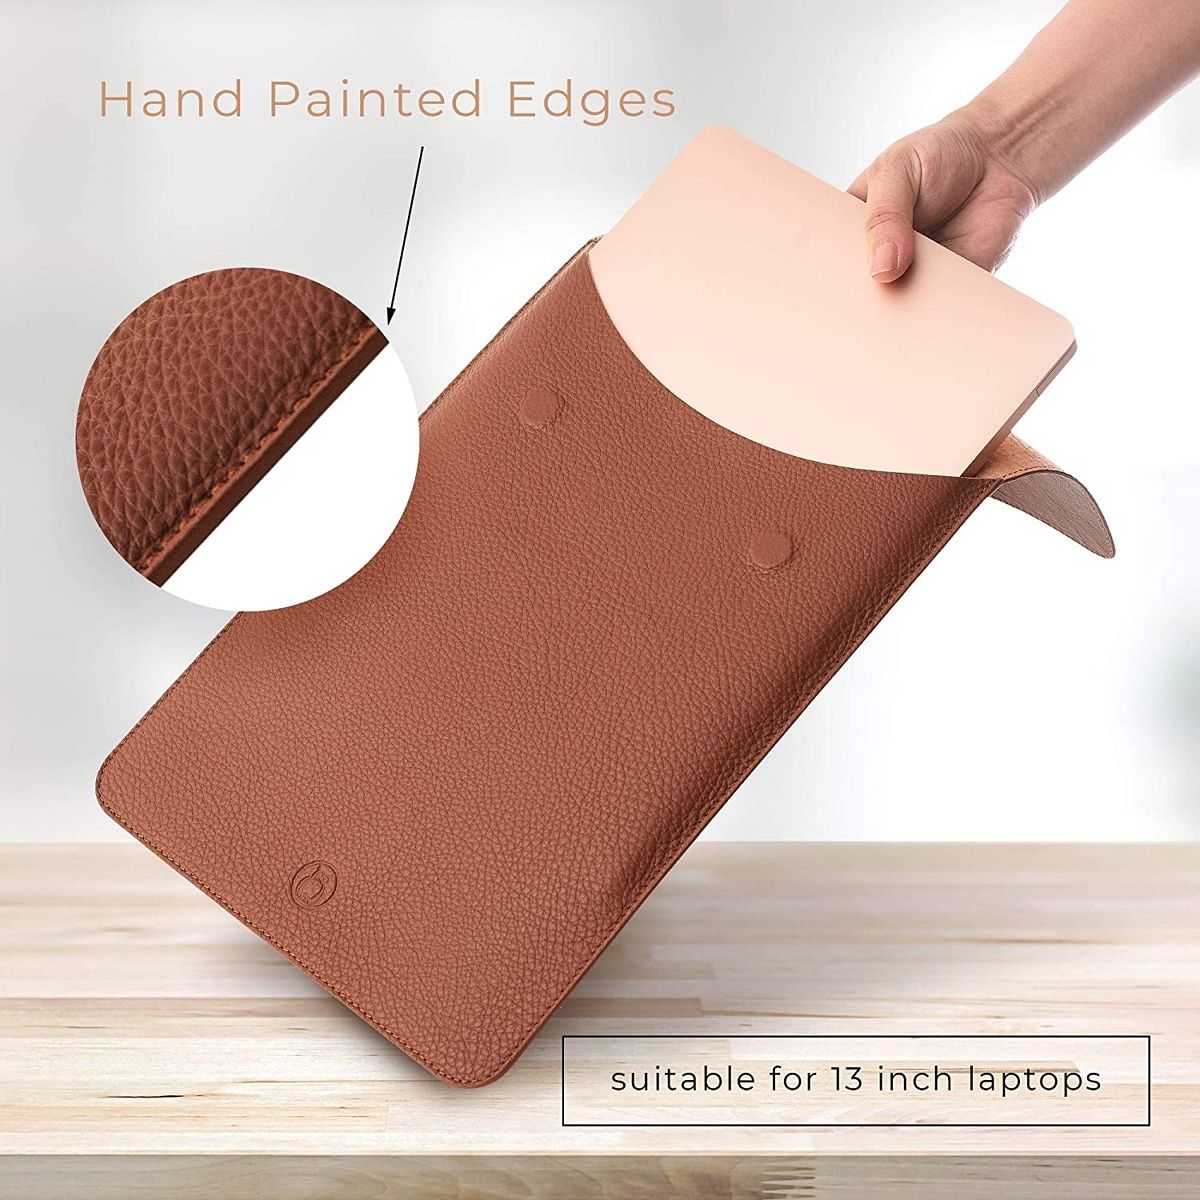 For those that want an elegant sleeve, UNIKA has a nice selection of color options. This sleeve features an ultra-thin design and accommodates 13-15 inch Chromebooks.